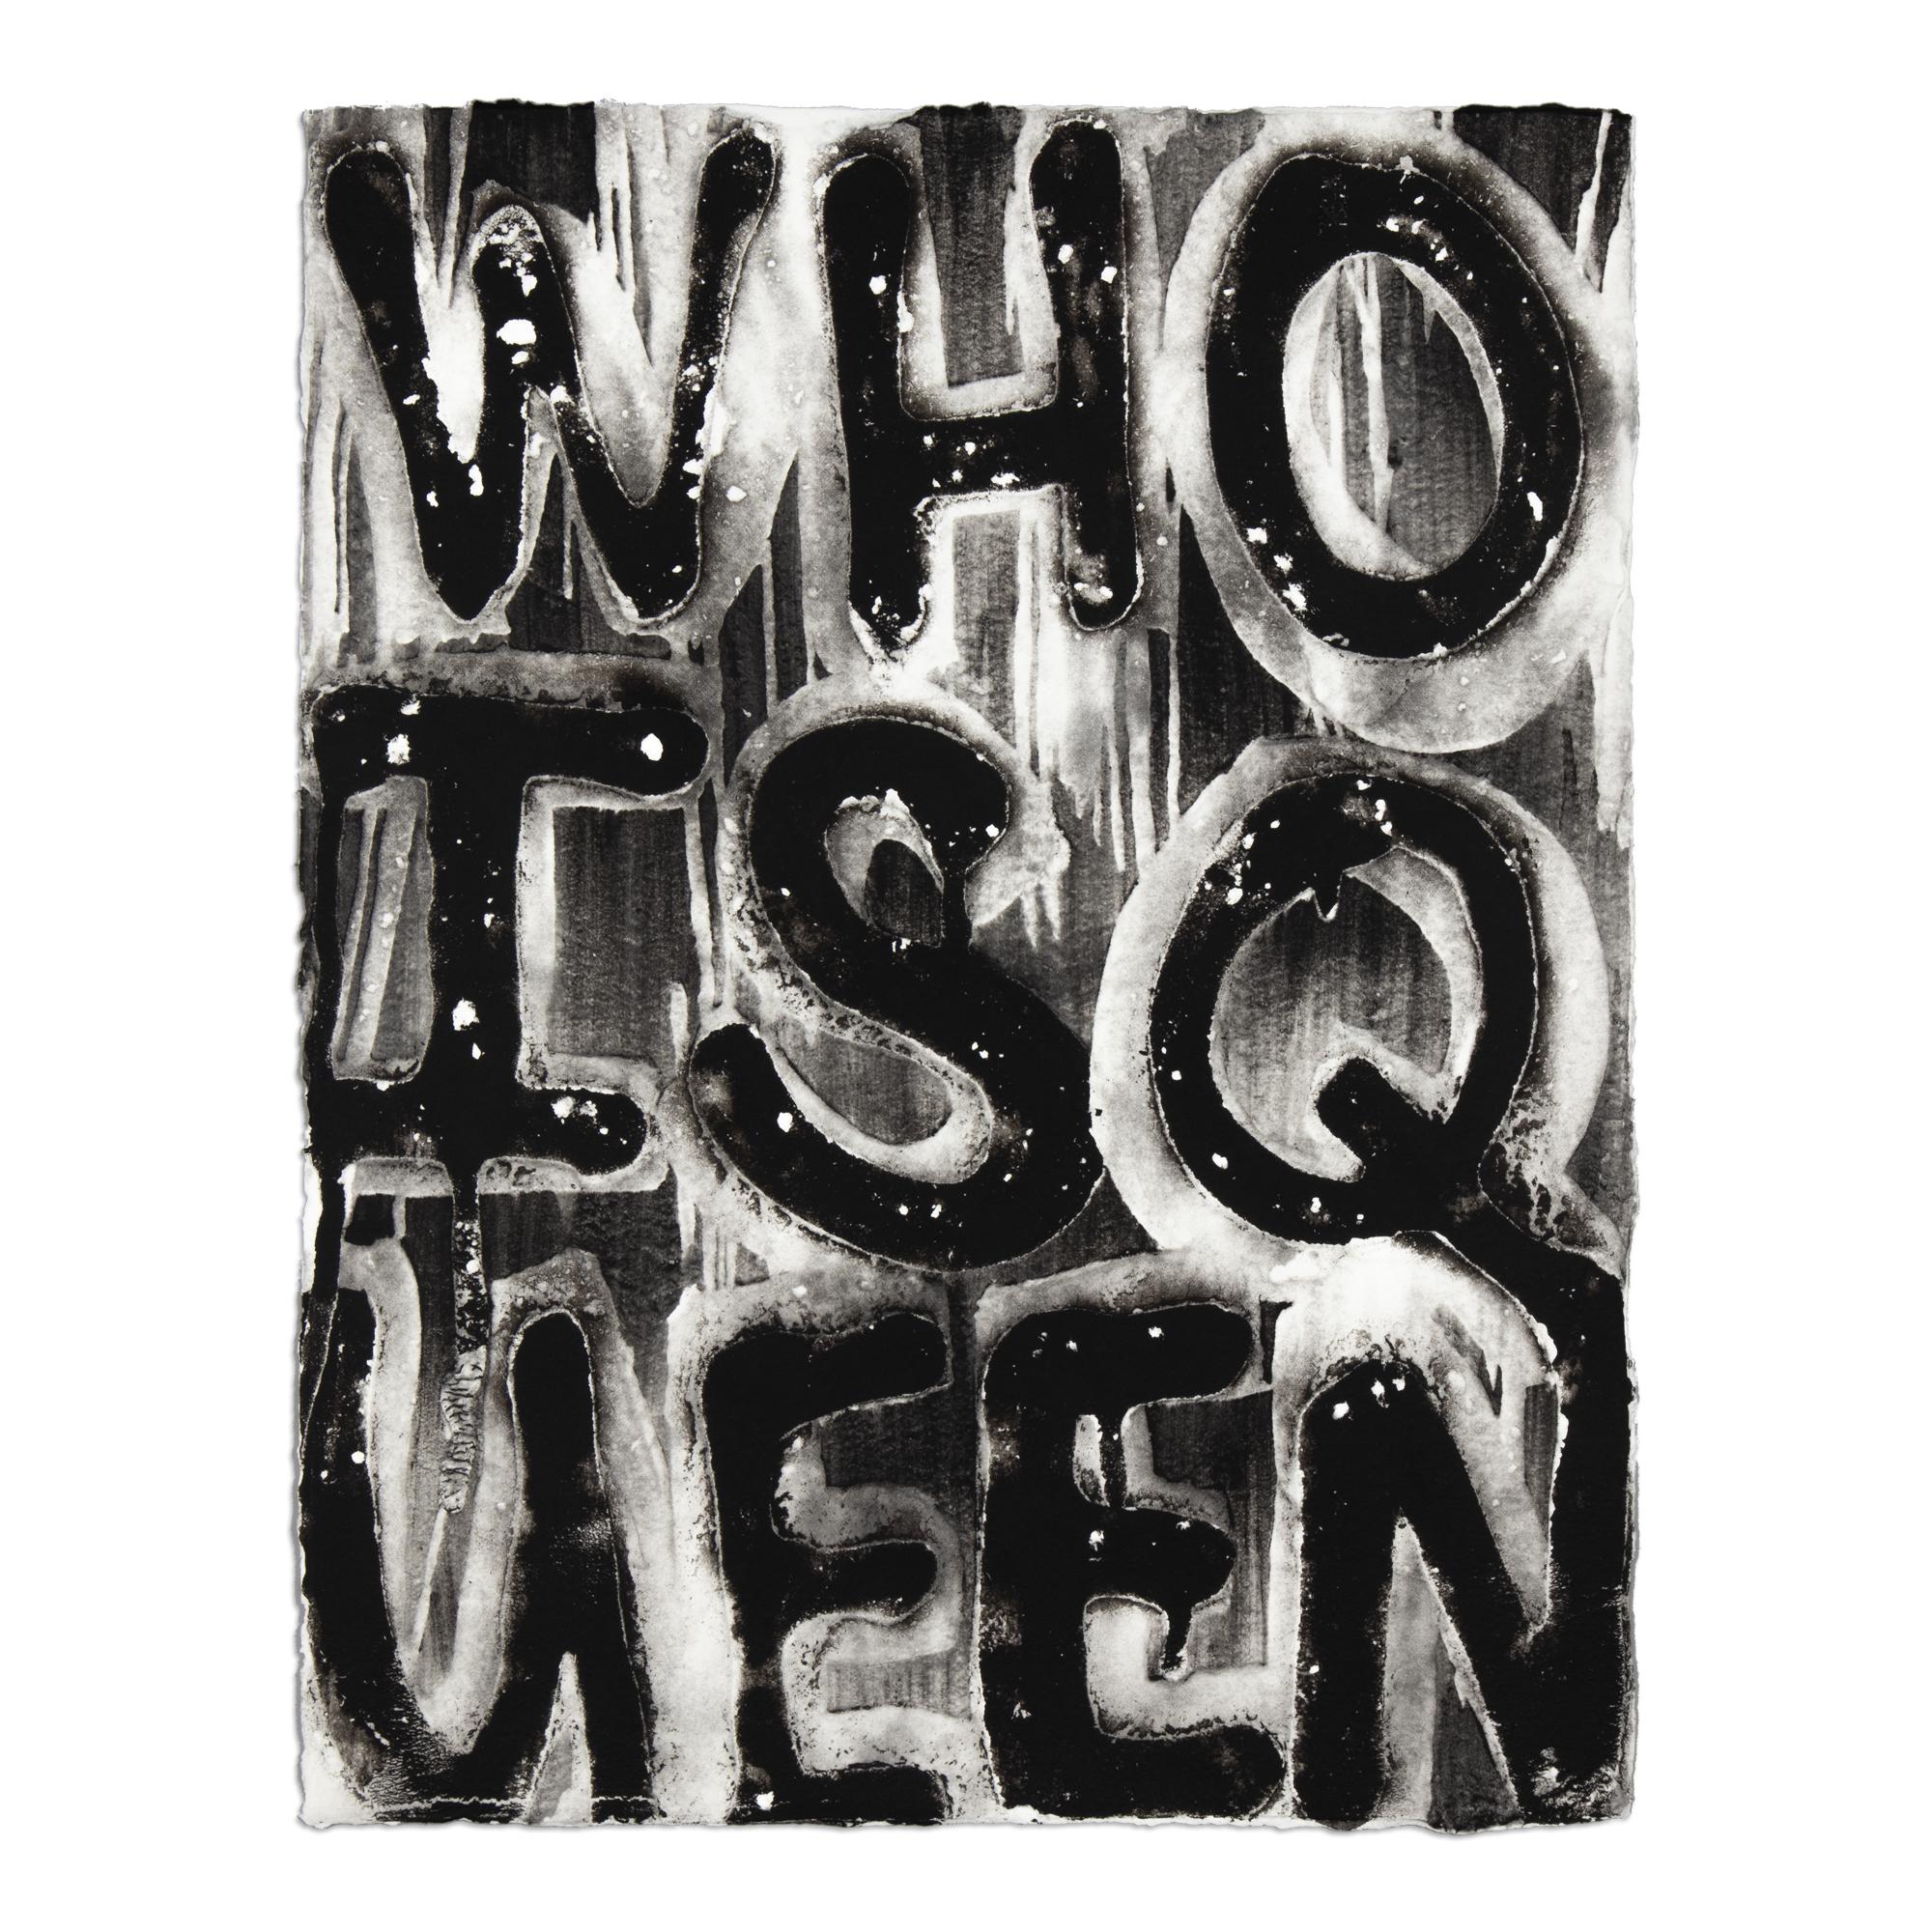 Adam Pendleton (American, b. 1984)
Who Is Queen?, 2021
Medium: Transfered pulp on cotton handmade paper
Dimensions: 61 × 47 cm (24 × 18 1/2 in)
Edition of 35: Hand-signed and numbered in pencil